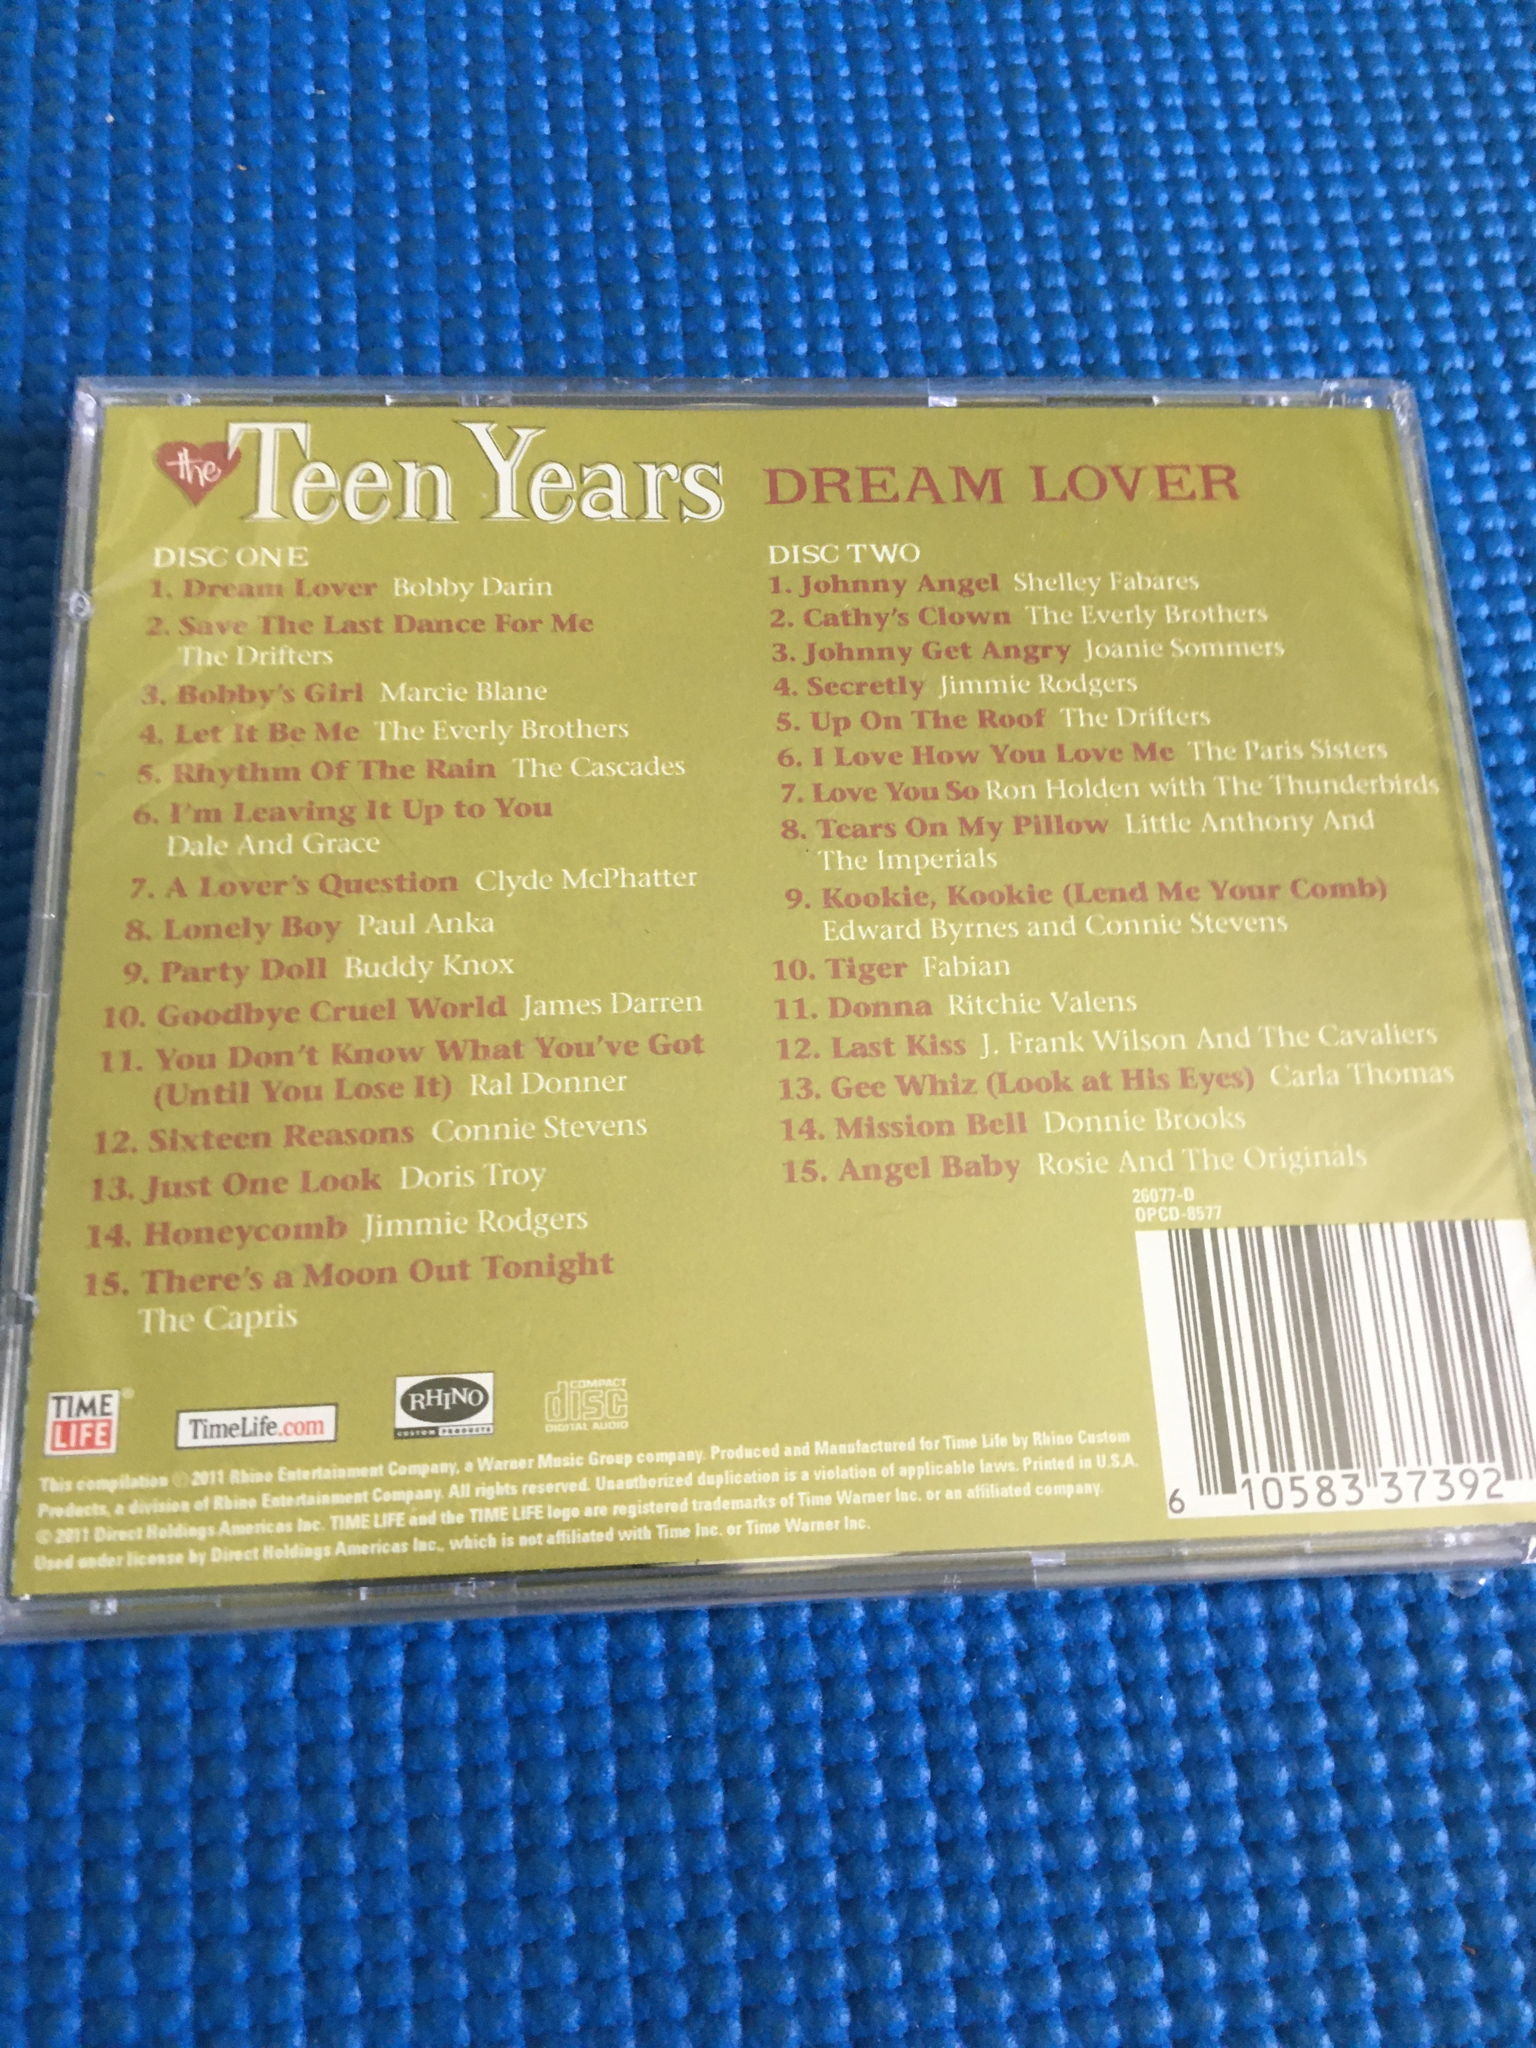 Time life the Teen Years  Dream lover sealed double cd ... 2